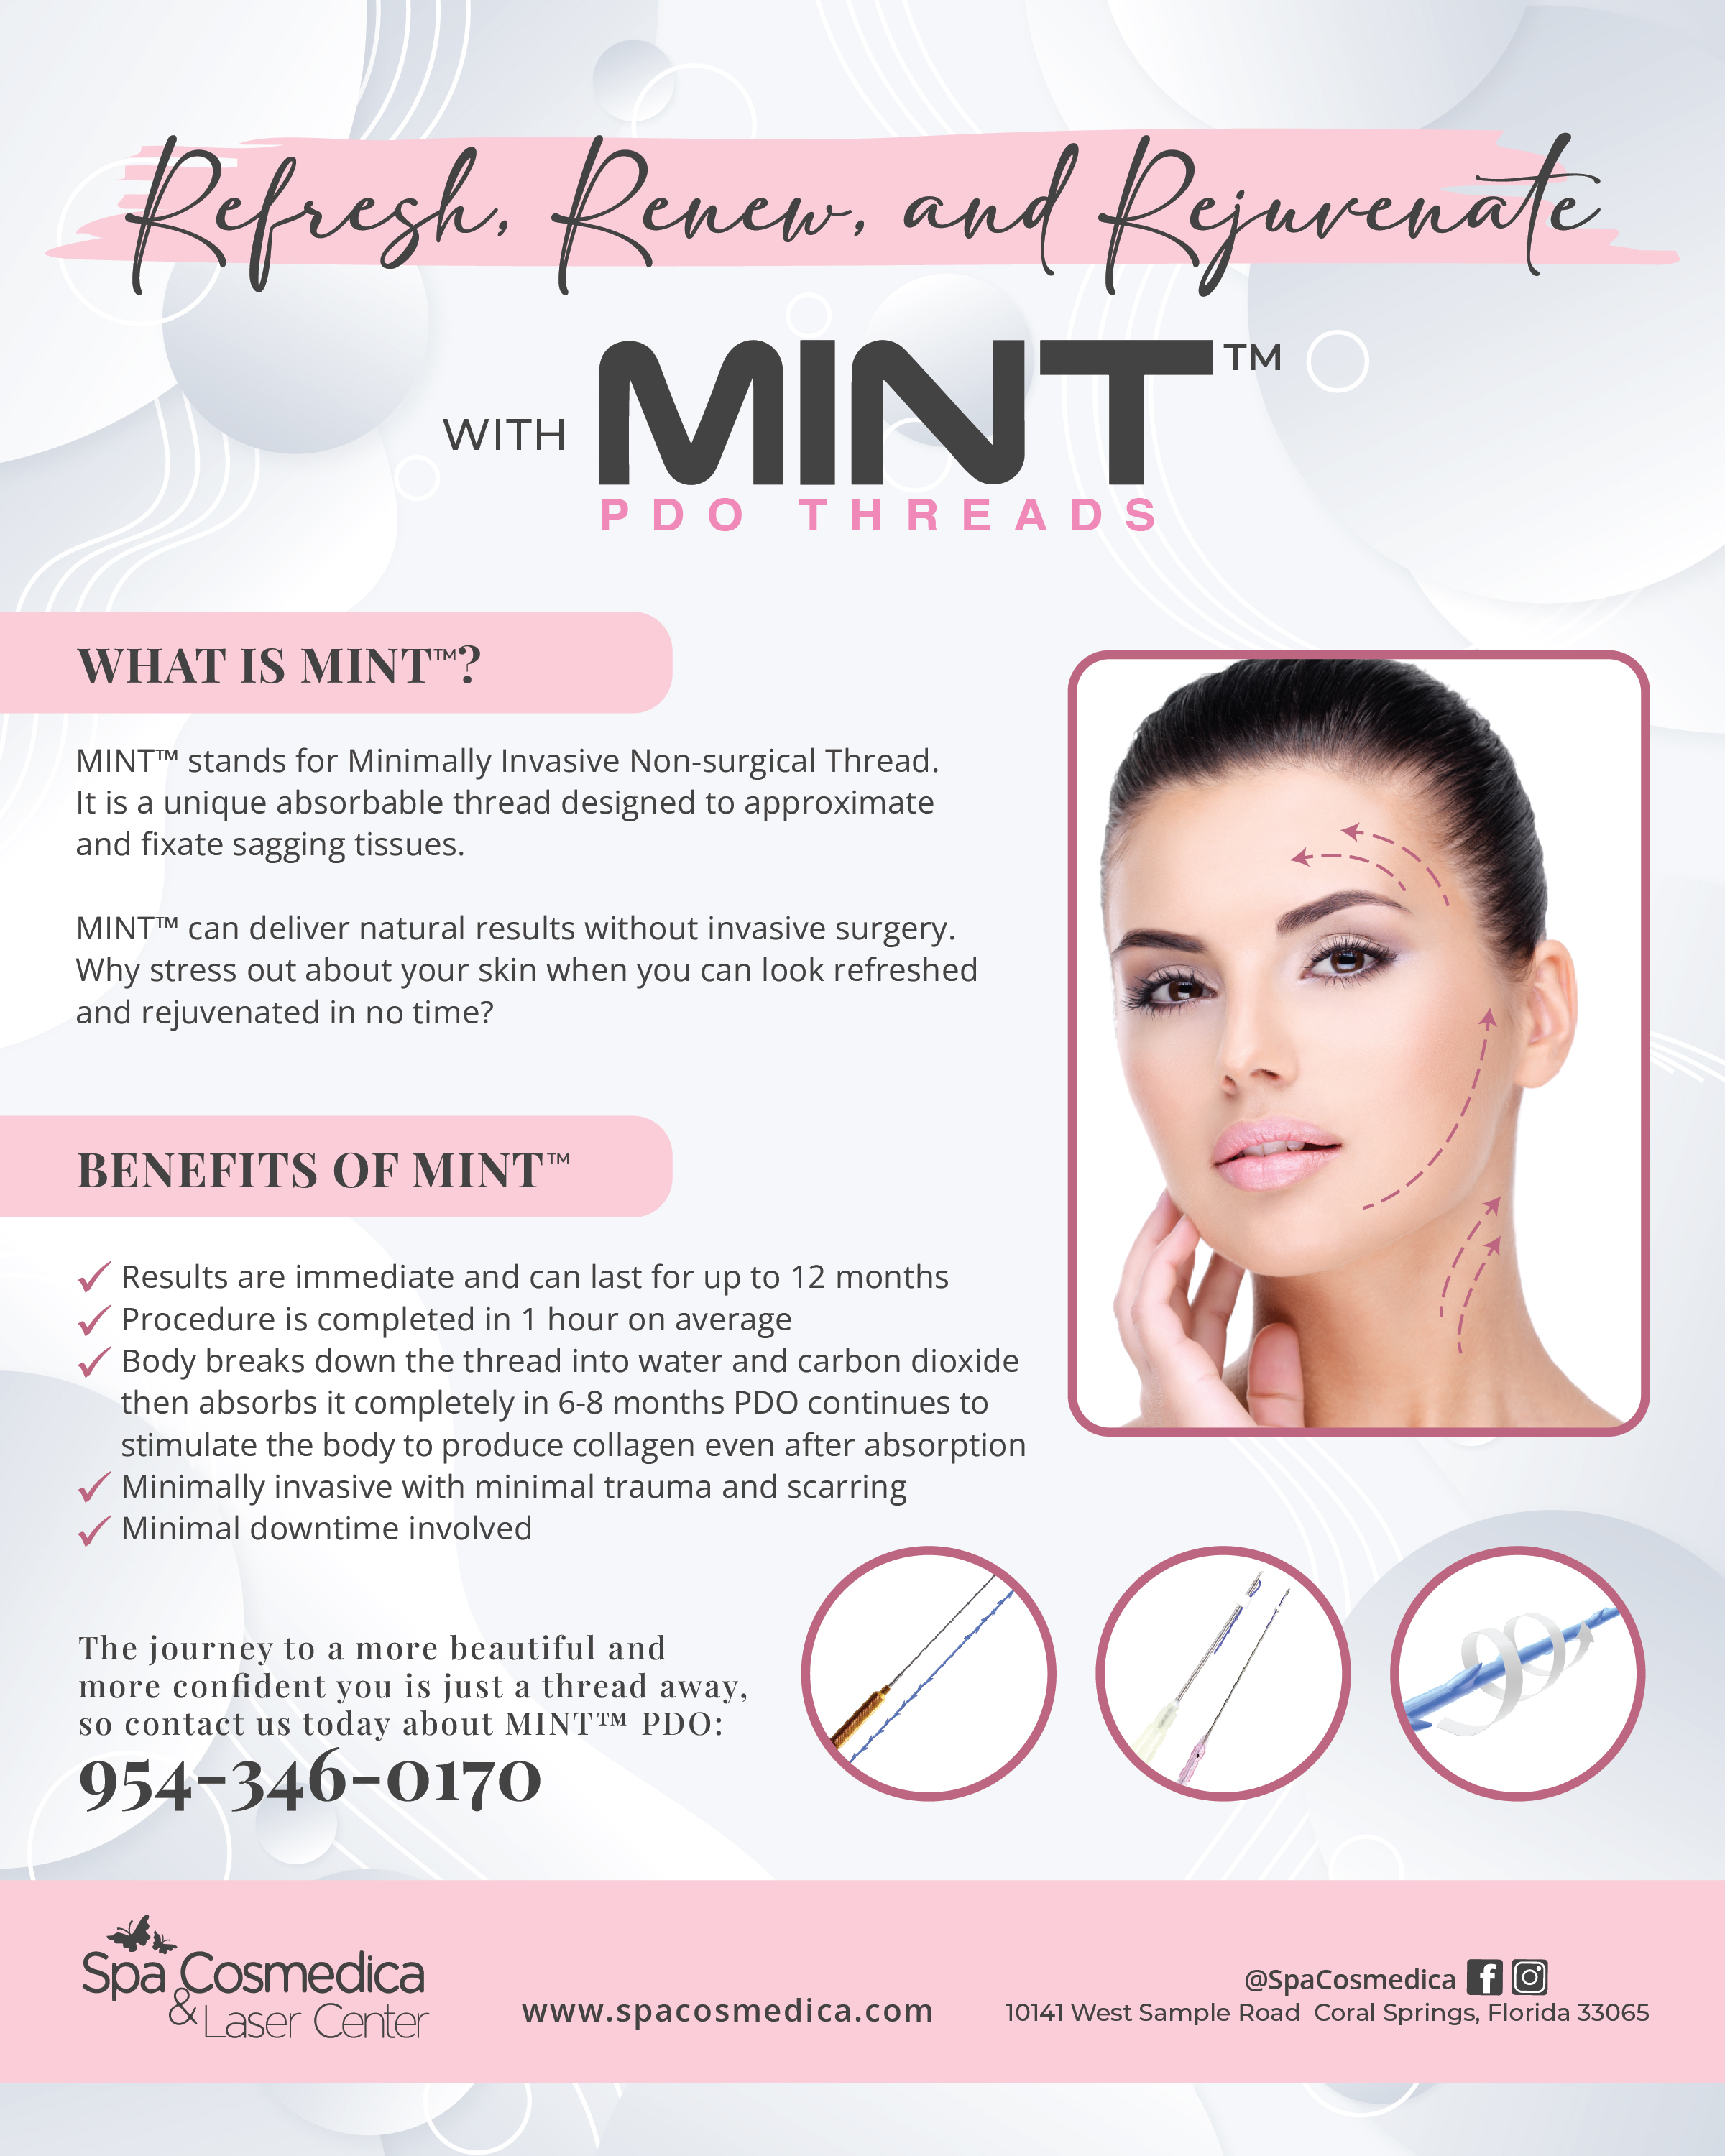 , Refresh, Renew and Rejuvenate with MINT!